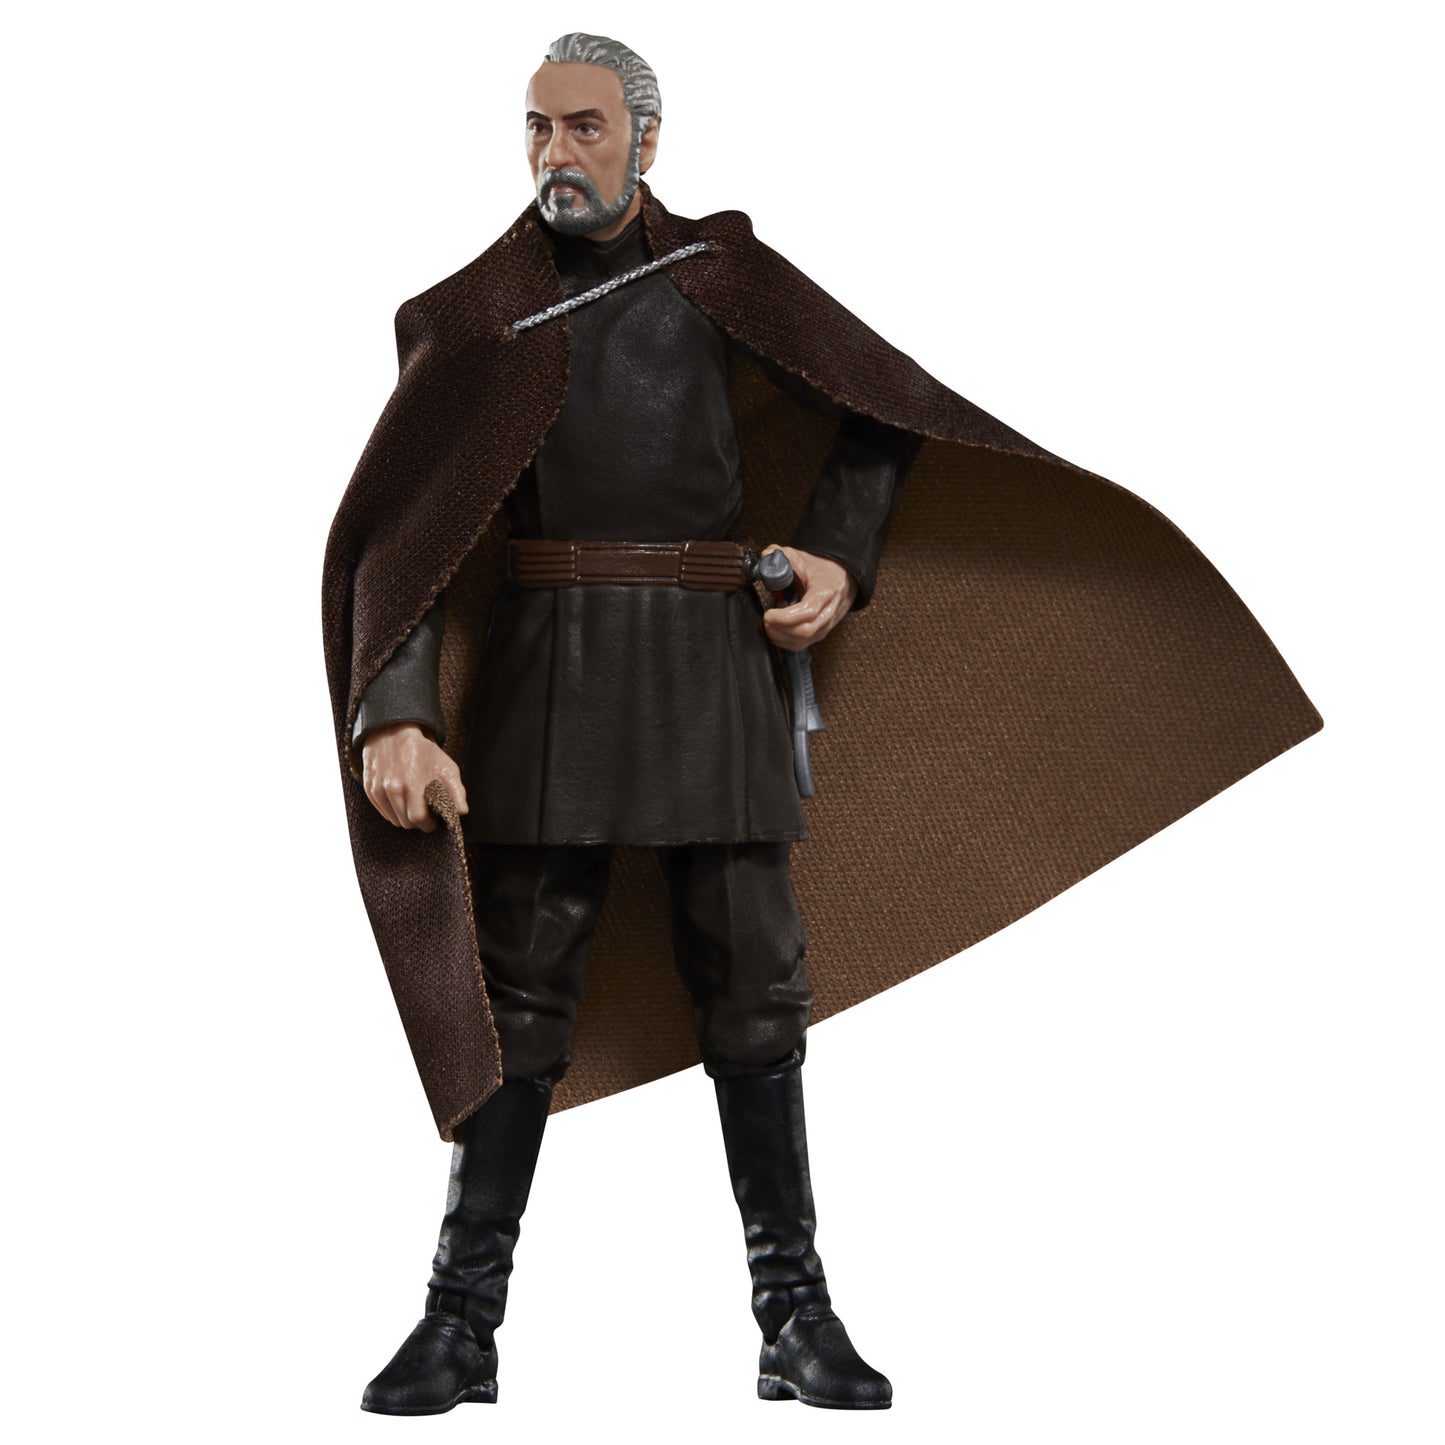 Star Wars The Vintage Collection Count Dooku, Star Wars: Attack of the Clones 3.75 Inch Collectible Action Figure